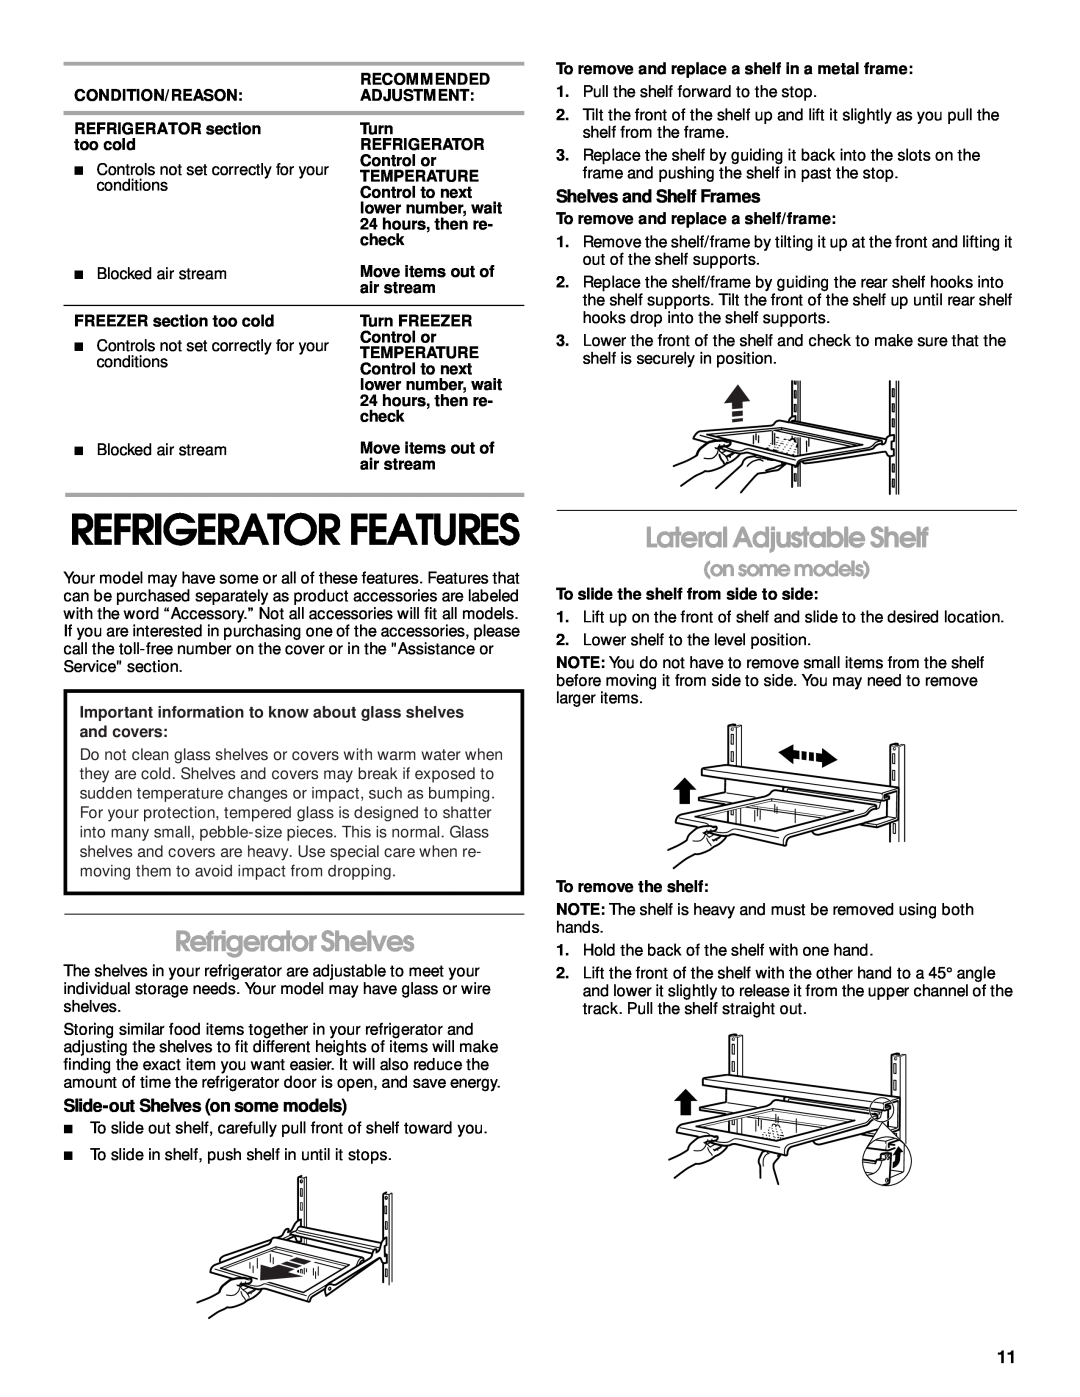 Crosley 2212430 manual Refrigerator Shelves, Lateral Adjustable Shelf, on some models, Refrigerator Features, Recommended 